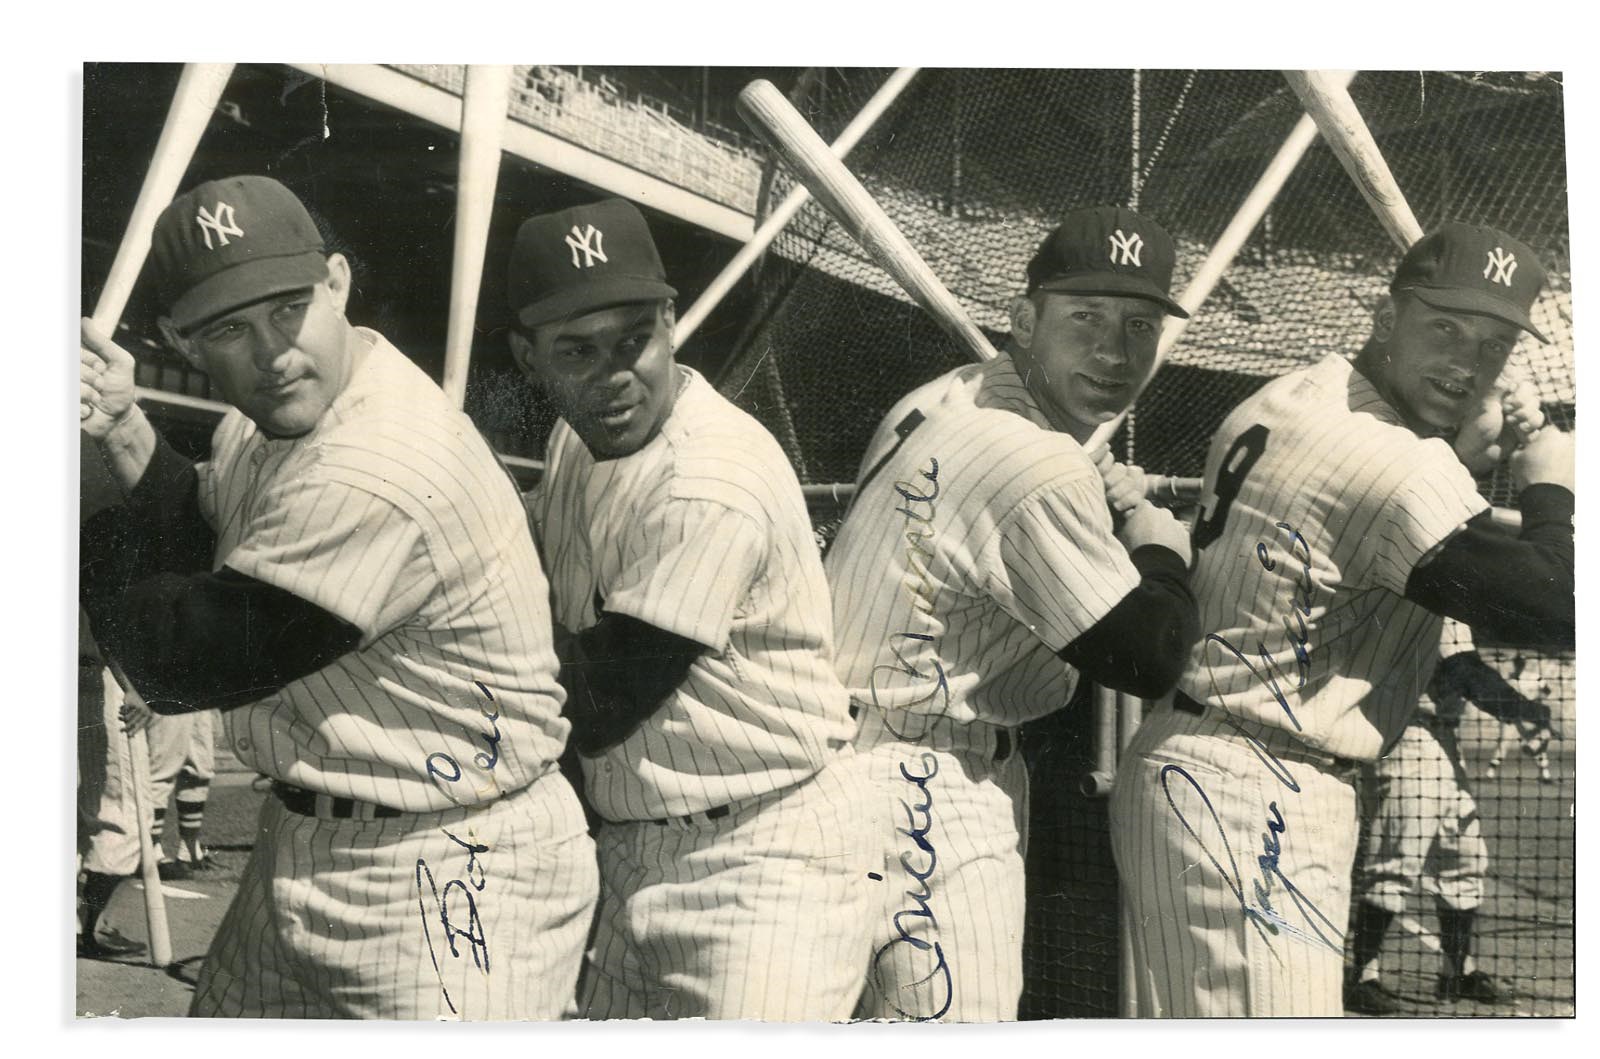 Mantle and Maris - Circa 1961 Mickey Mantle & Roger Maris Vintage Signed Photo from Hector Lopez (PSA)